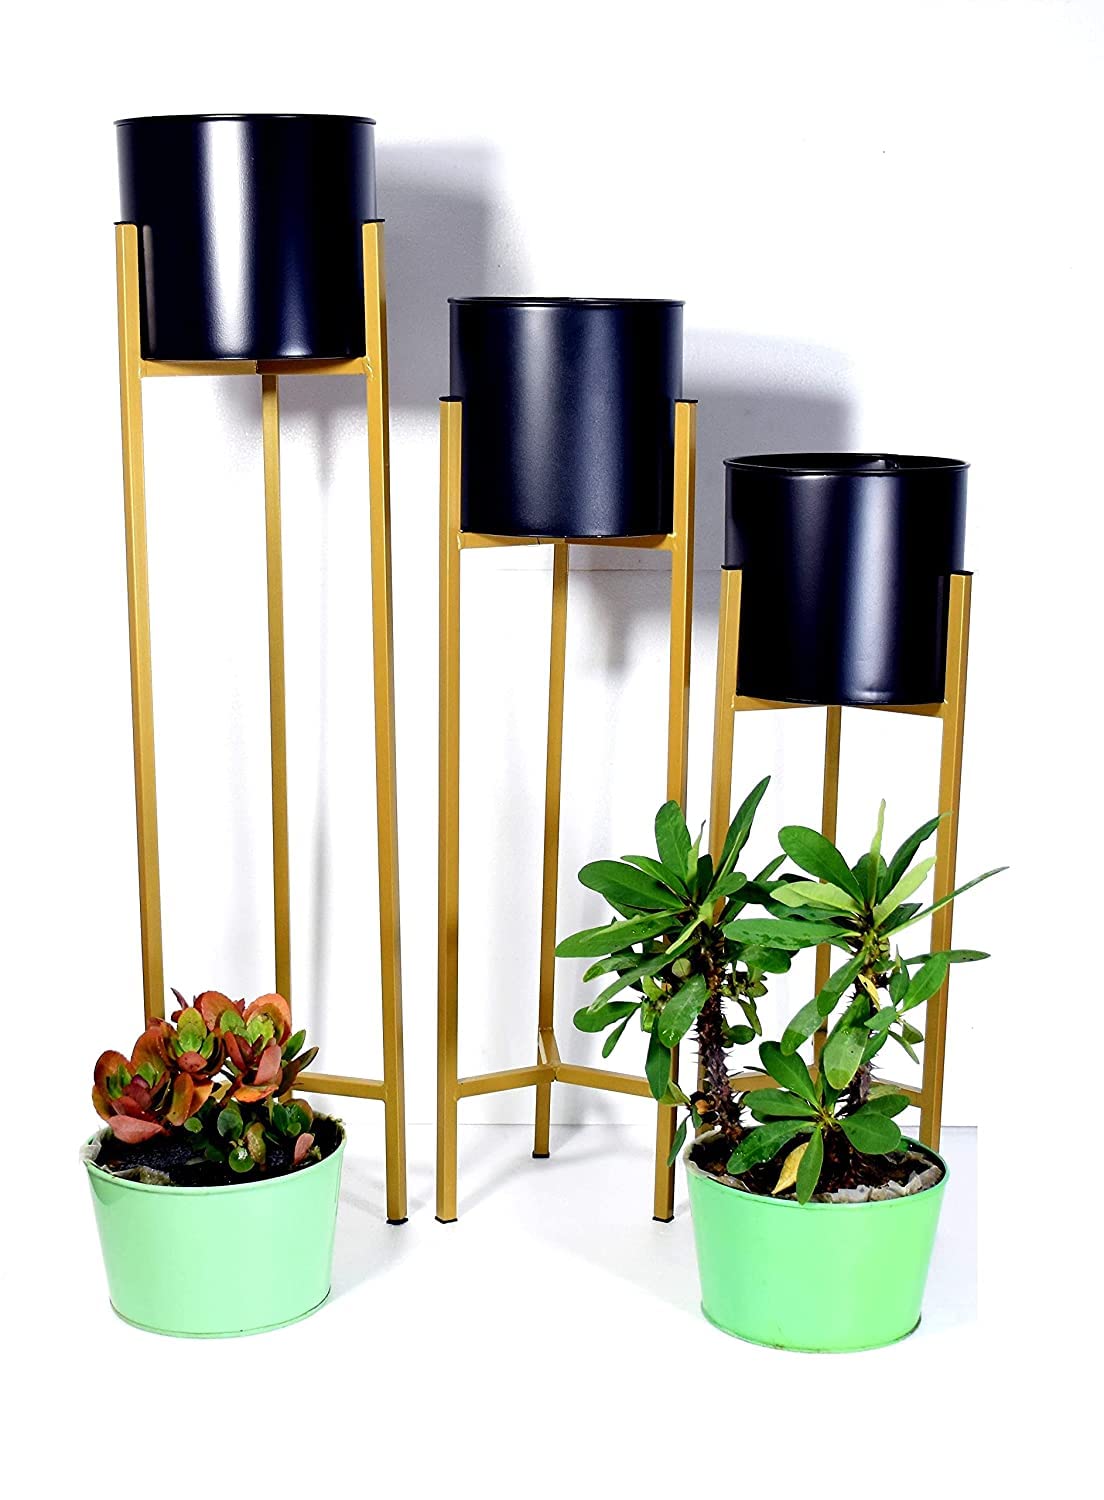 Metal Plant Stand With Planter Pot, Flower Pot Stand For Balcony Indoor Outdoor Garden Home Decor Item Dime Store